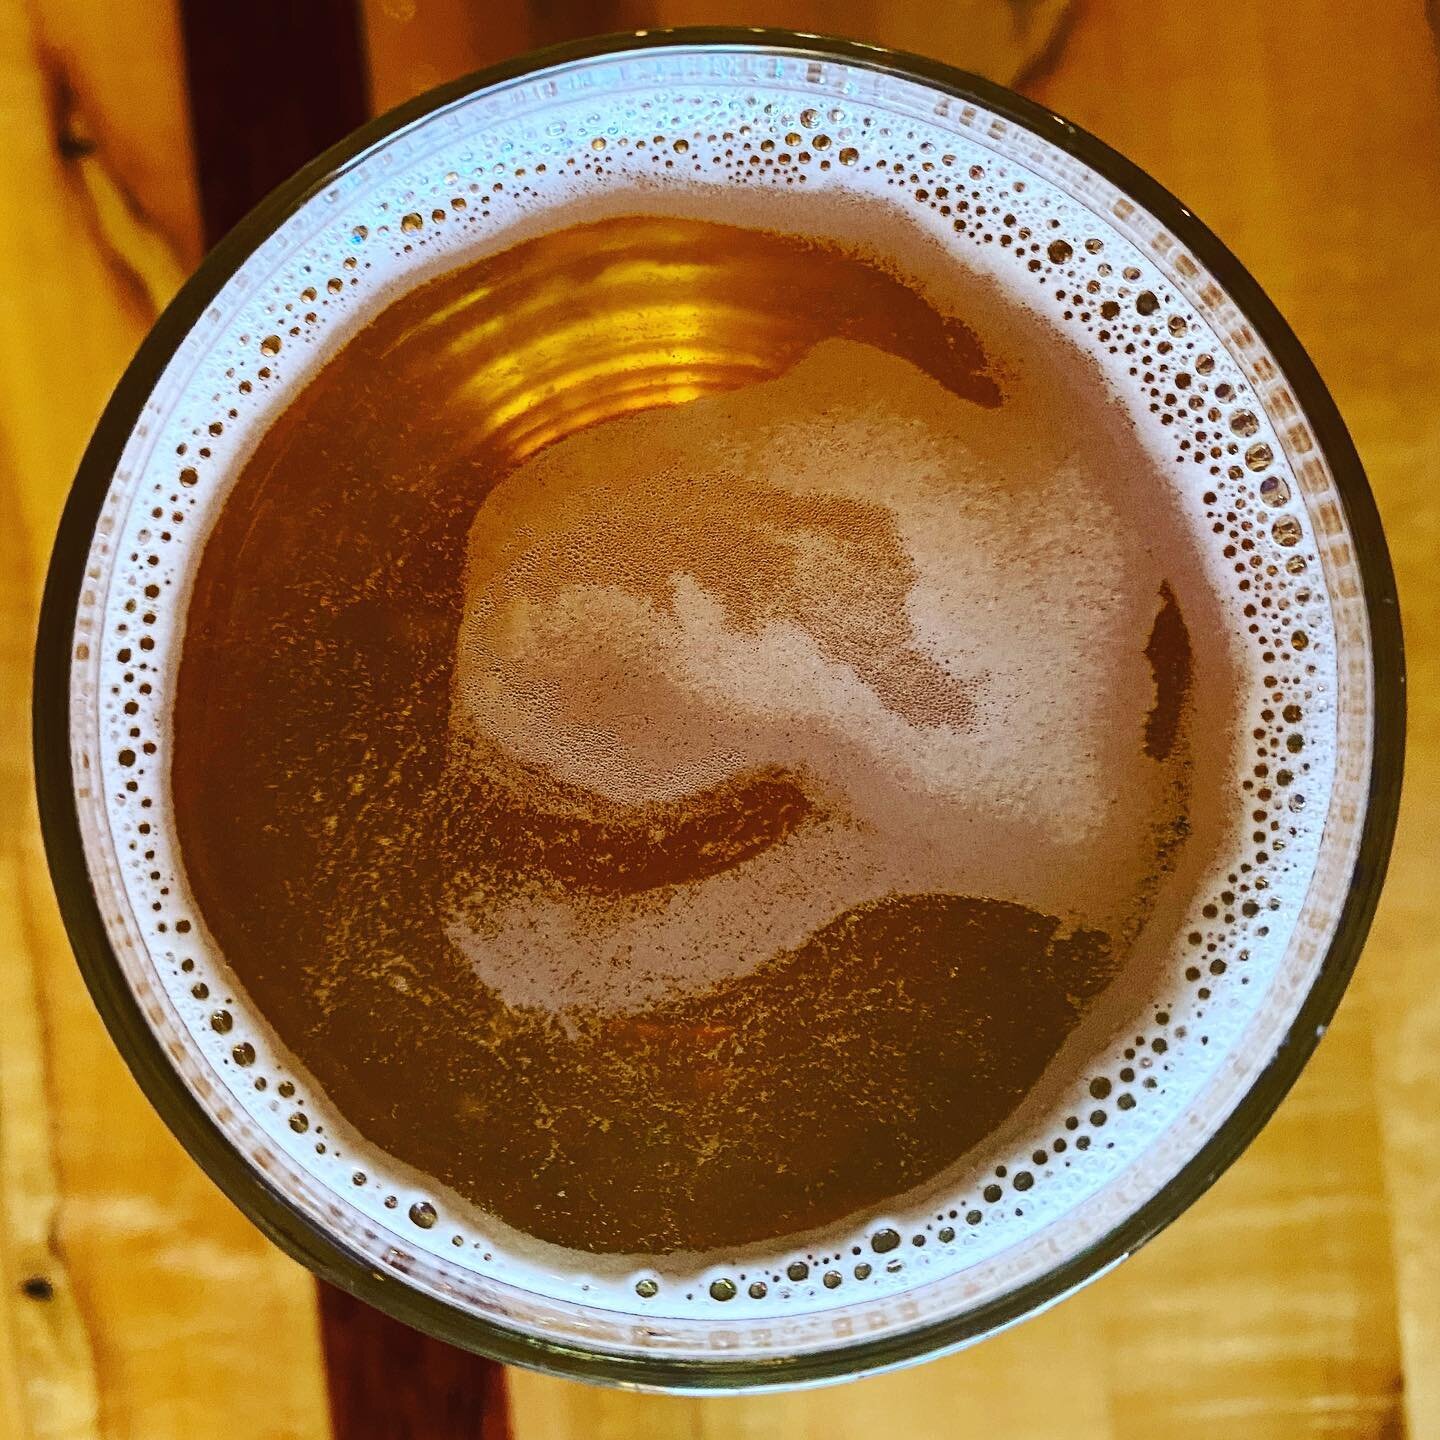 There&rsquo;s a T-Rex sticking its big ol&rsquo; head into my super smooth nitro Blonde Joe vanilla and coffee blonde ale from @manhattanbrewing 🦖🦖 What do you see?? #beerrorschach
.
.
Parksnpints.com
.
.
#KSbeer #drinklocal #blonde #findyourpint #